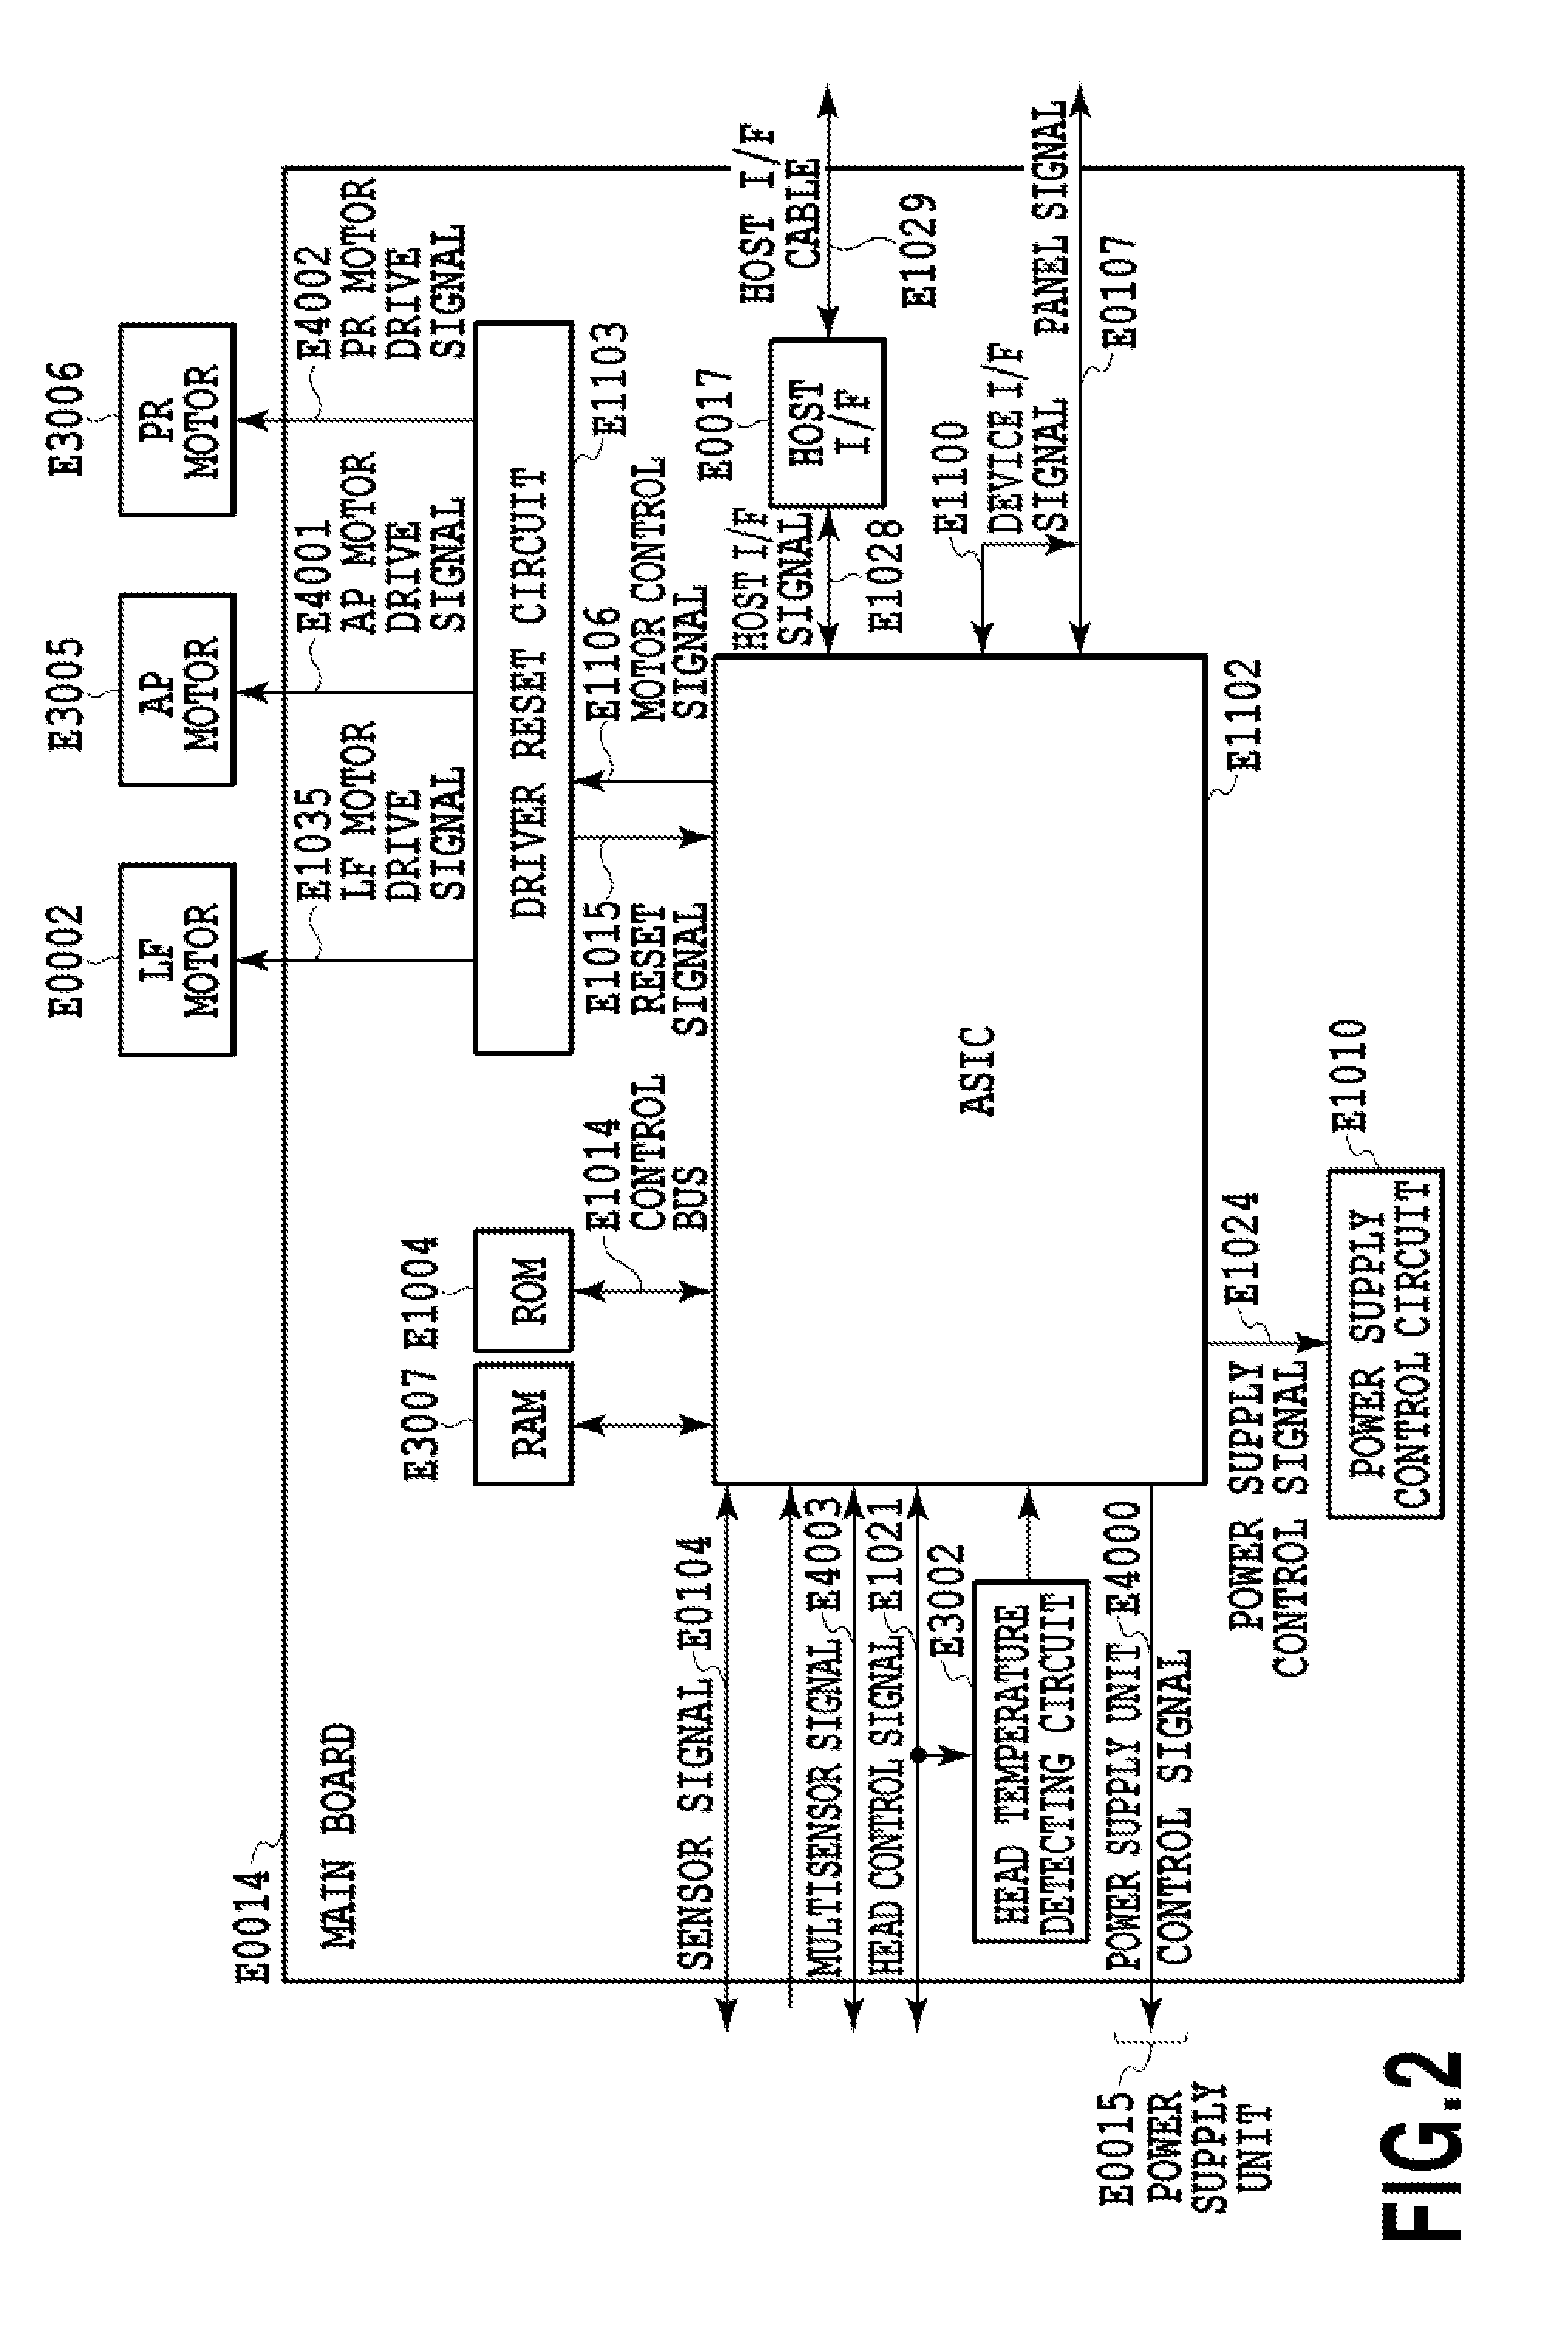 Image processing apparatus and method using different dither patterns for different inks and selecting a quantization process for each ink